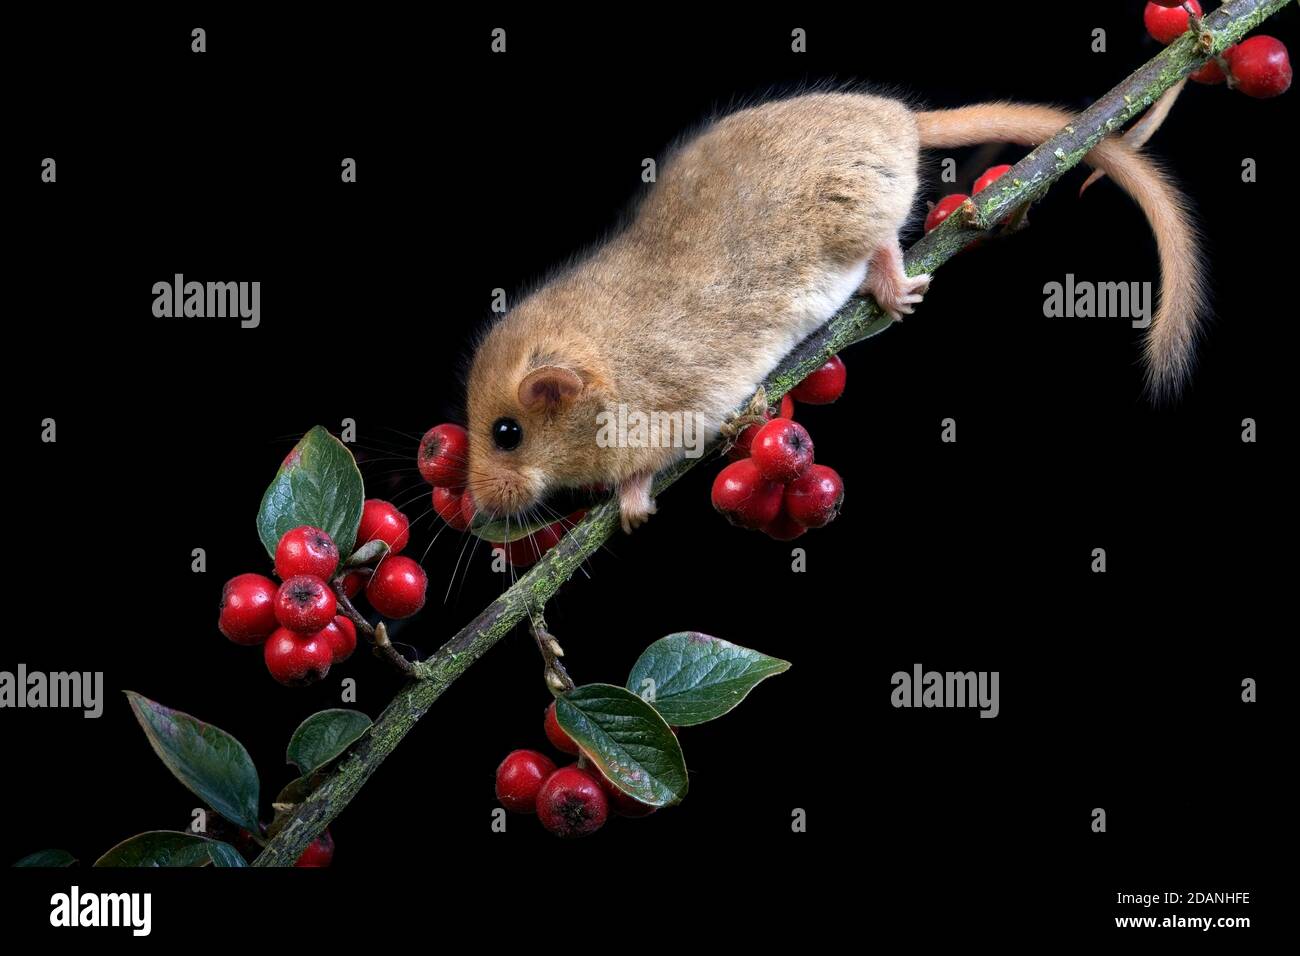 COMMON DORMOUSE muscardinus avellanarius, ADULT STANDING ON BRANCH WITH BERRIES, NORMANDY IN FRANCE Stock Photo